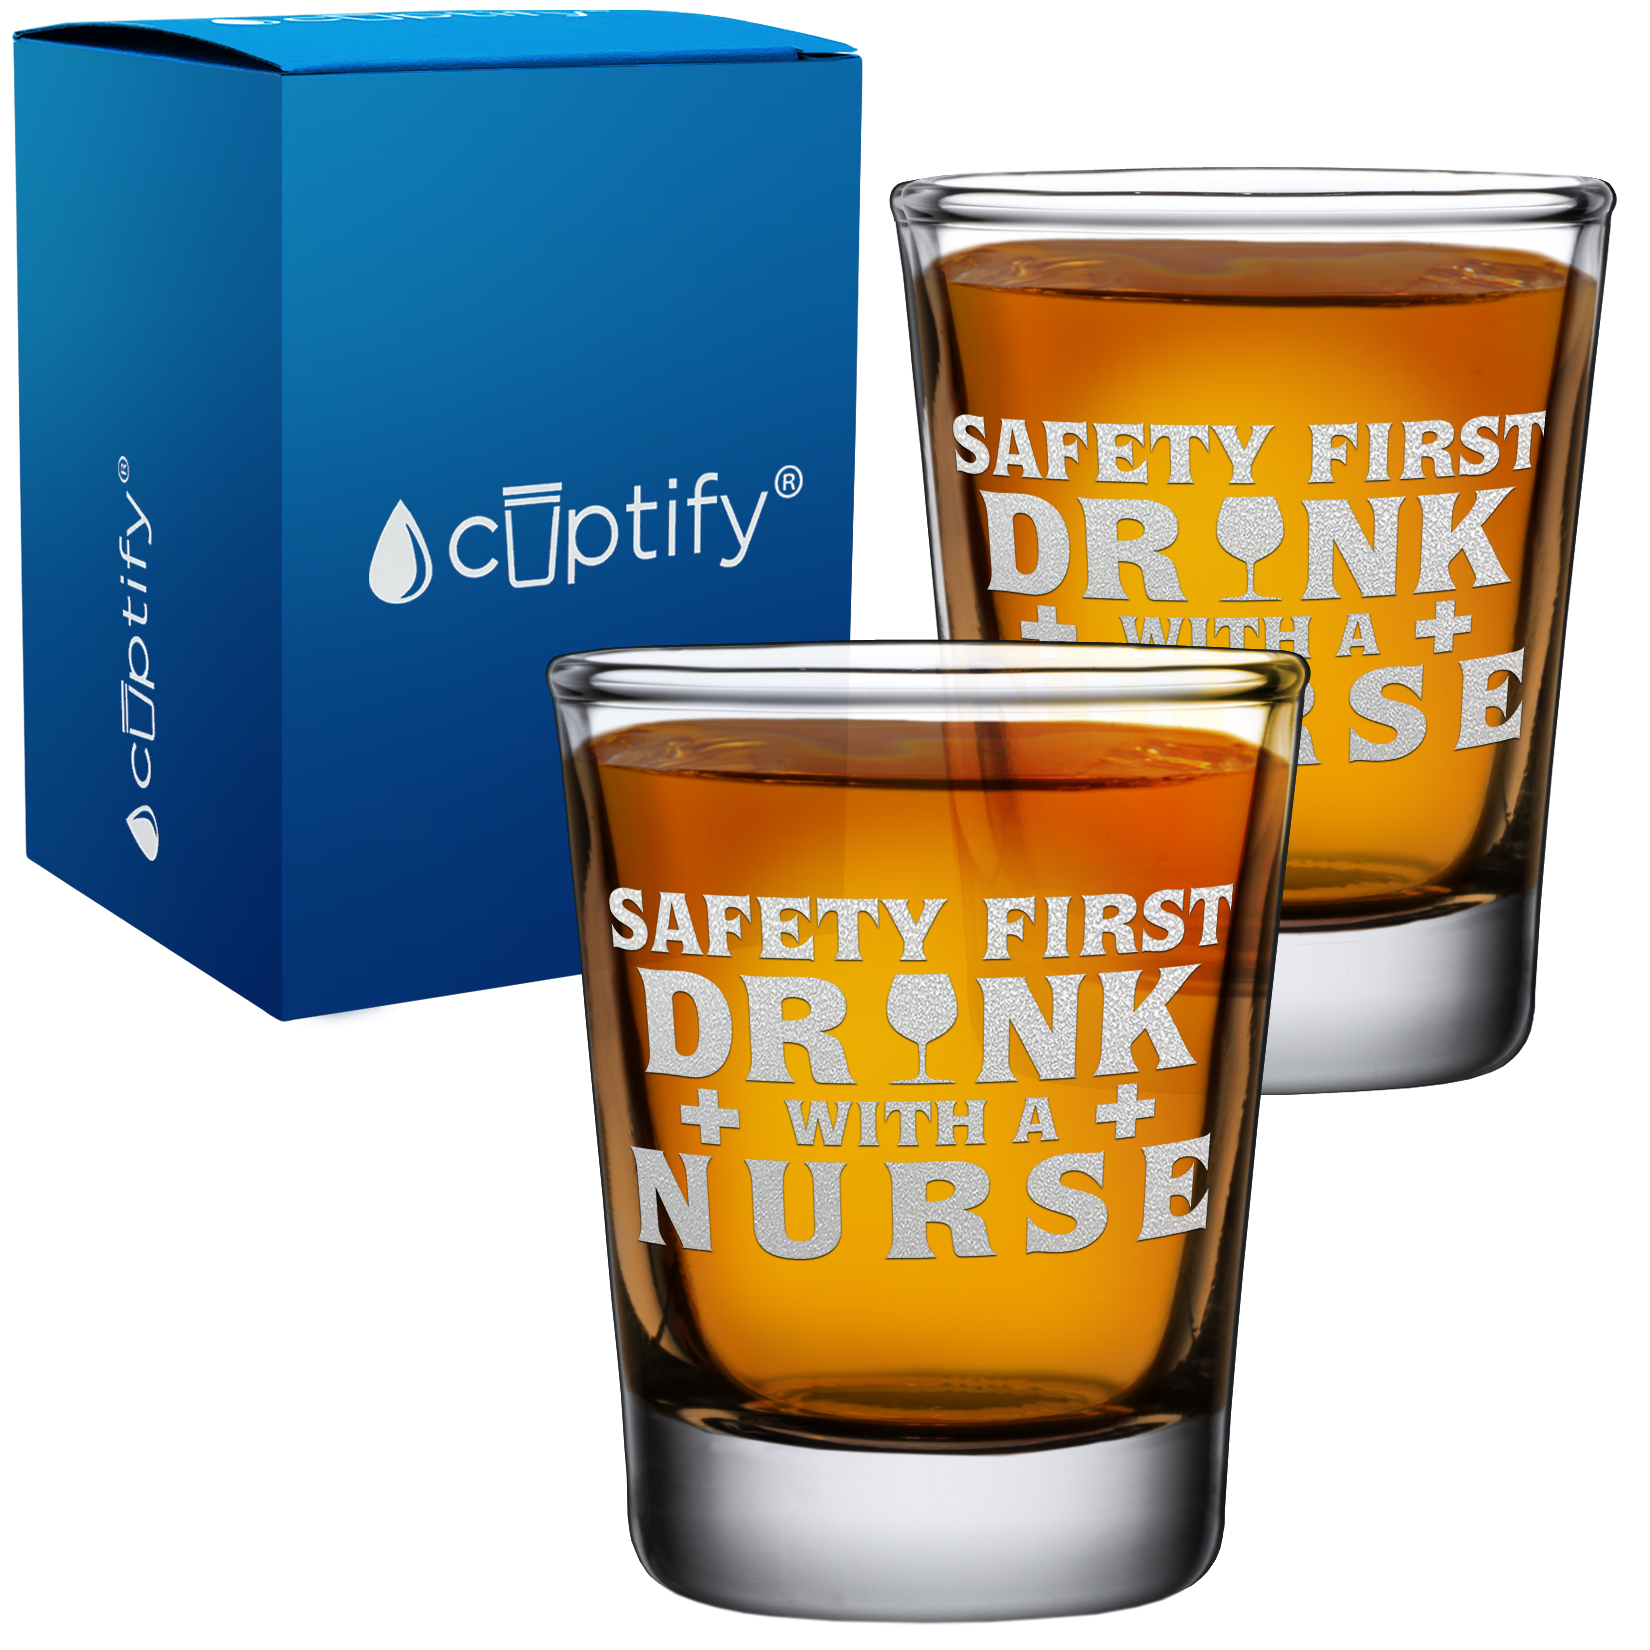 Safety First Drink with a Nurse on 2oz Shot Glasses - Set of 2